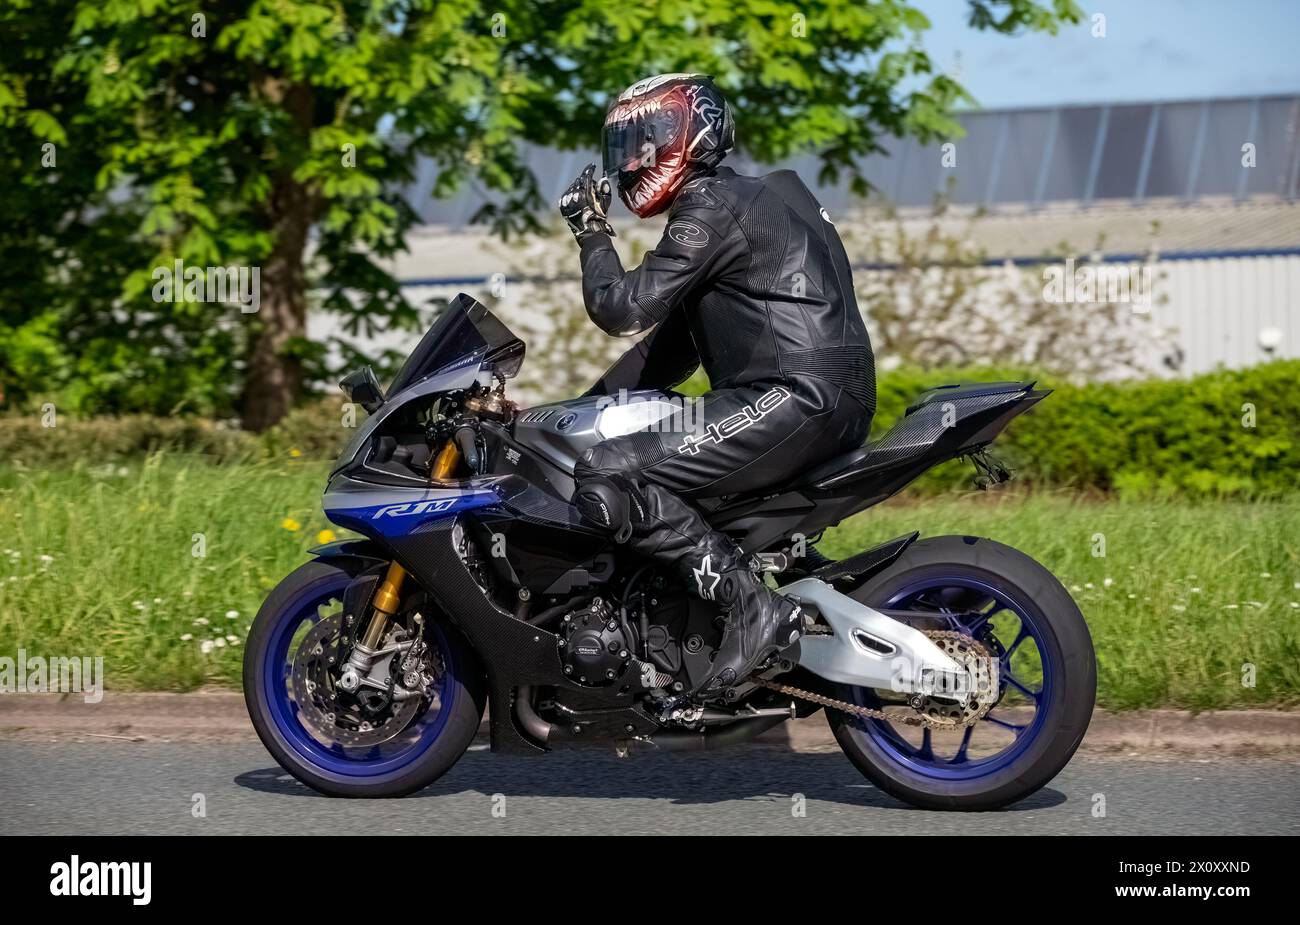 Milton Keynes,UK- Apr 14th 2024: Man in black motorcycle leathers riding a Yamaha motorcycle on a British road Stock Photo